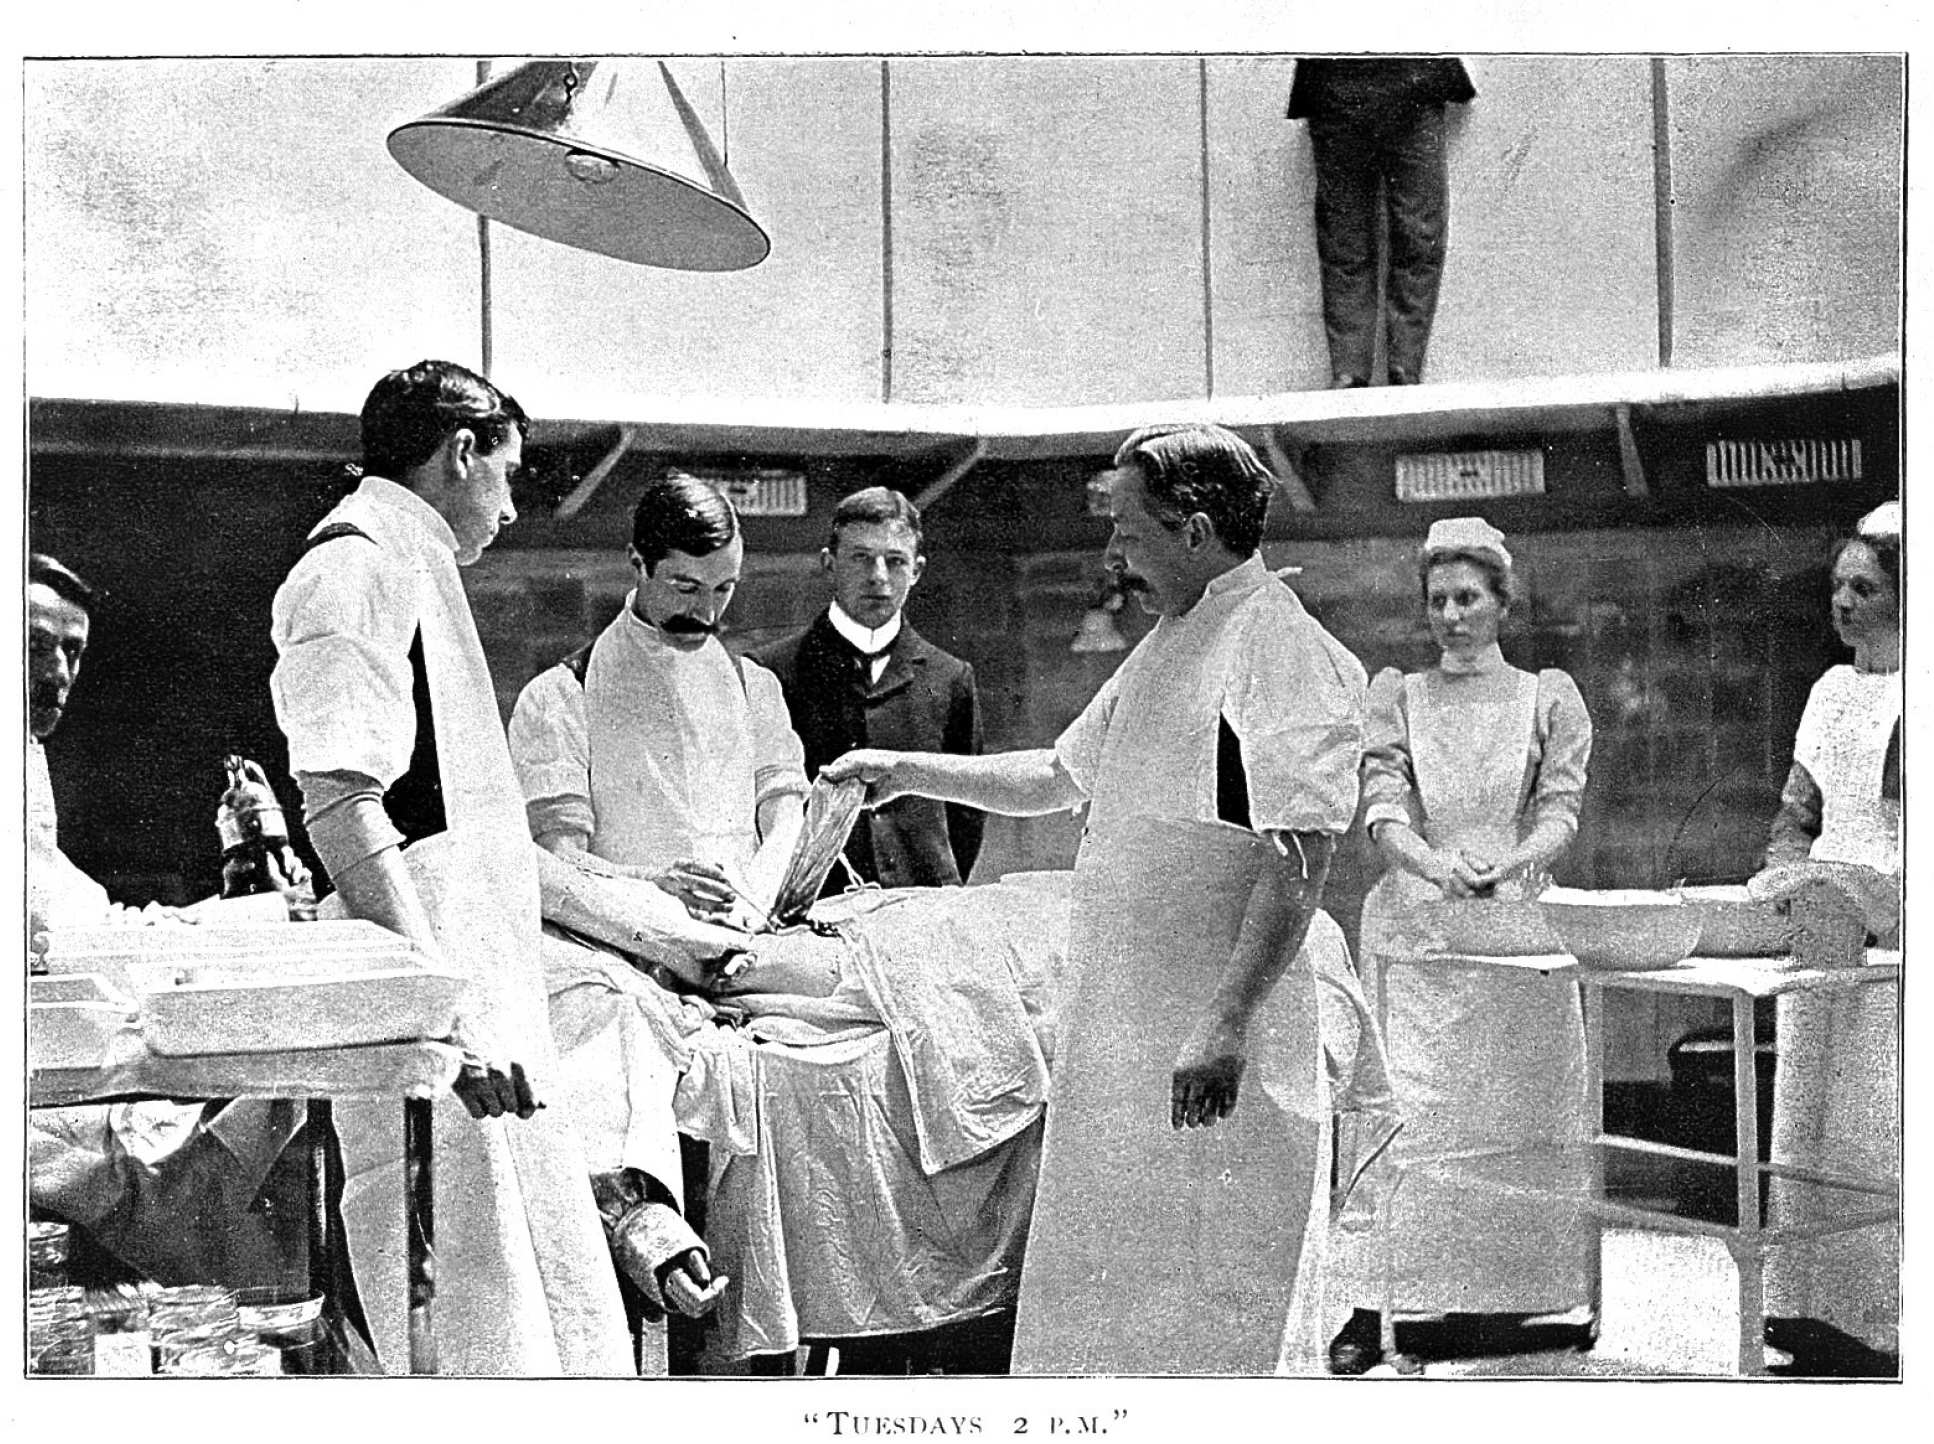 A surgical operation being performed, circa 1900 (Image: Wellcome Collection)